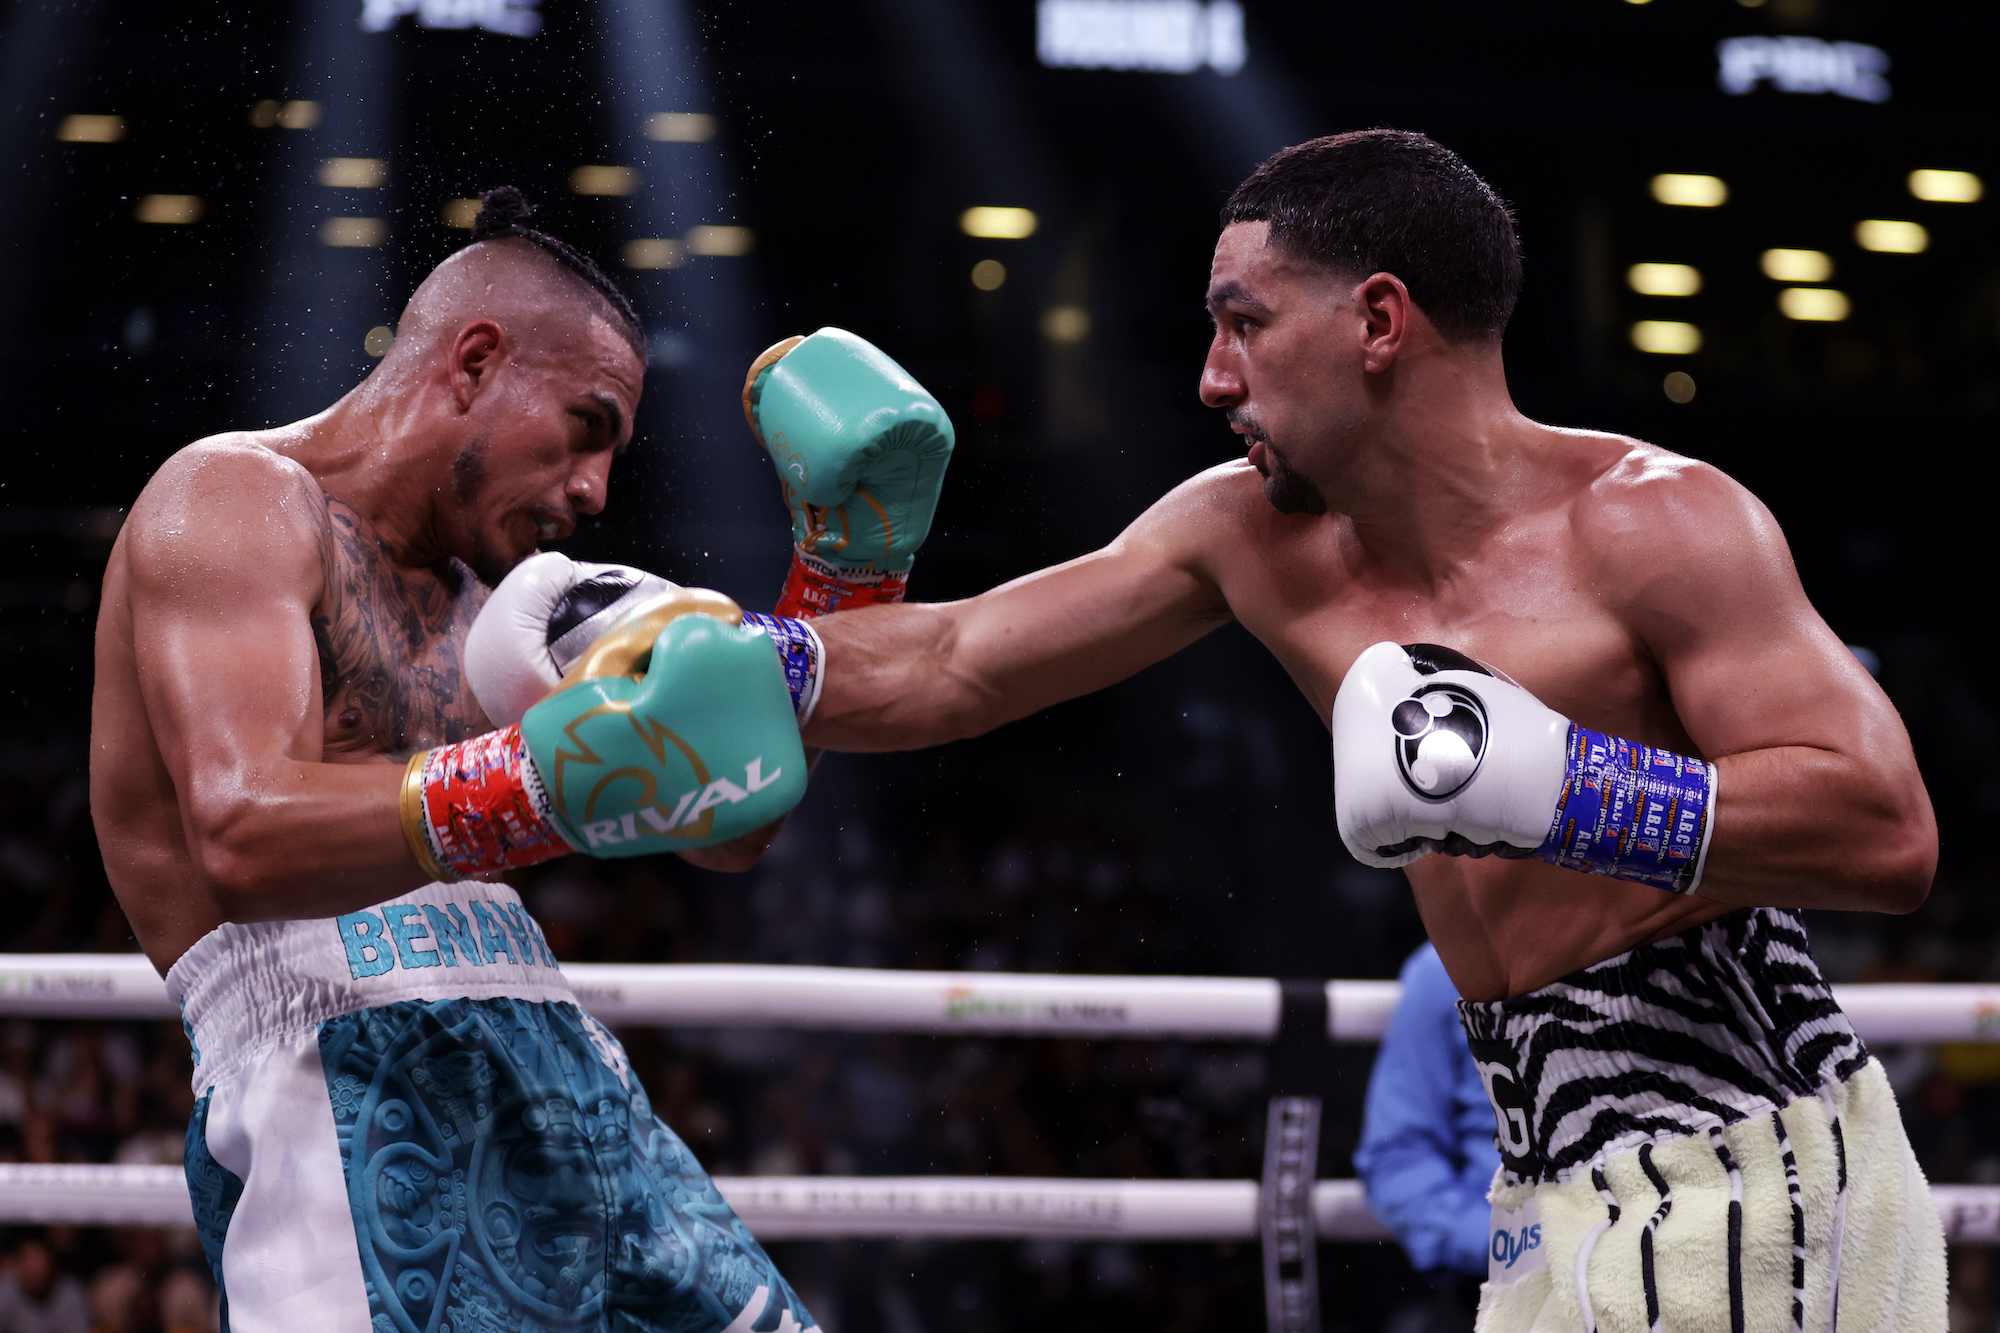 NEW YORK, NEW YORK - JULY 30: Danny Garcia lands a punch on Jose Benavidez Jr. (teal shorts) during their super welterweight boxing match at Barclays Center on July 30, 2022 in in the Brooklyn borough of New York. (Photo by Adam Hunger/Getty Images)